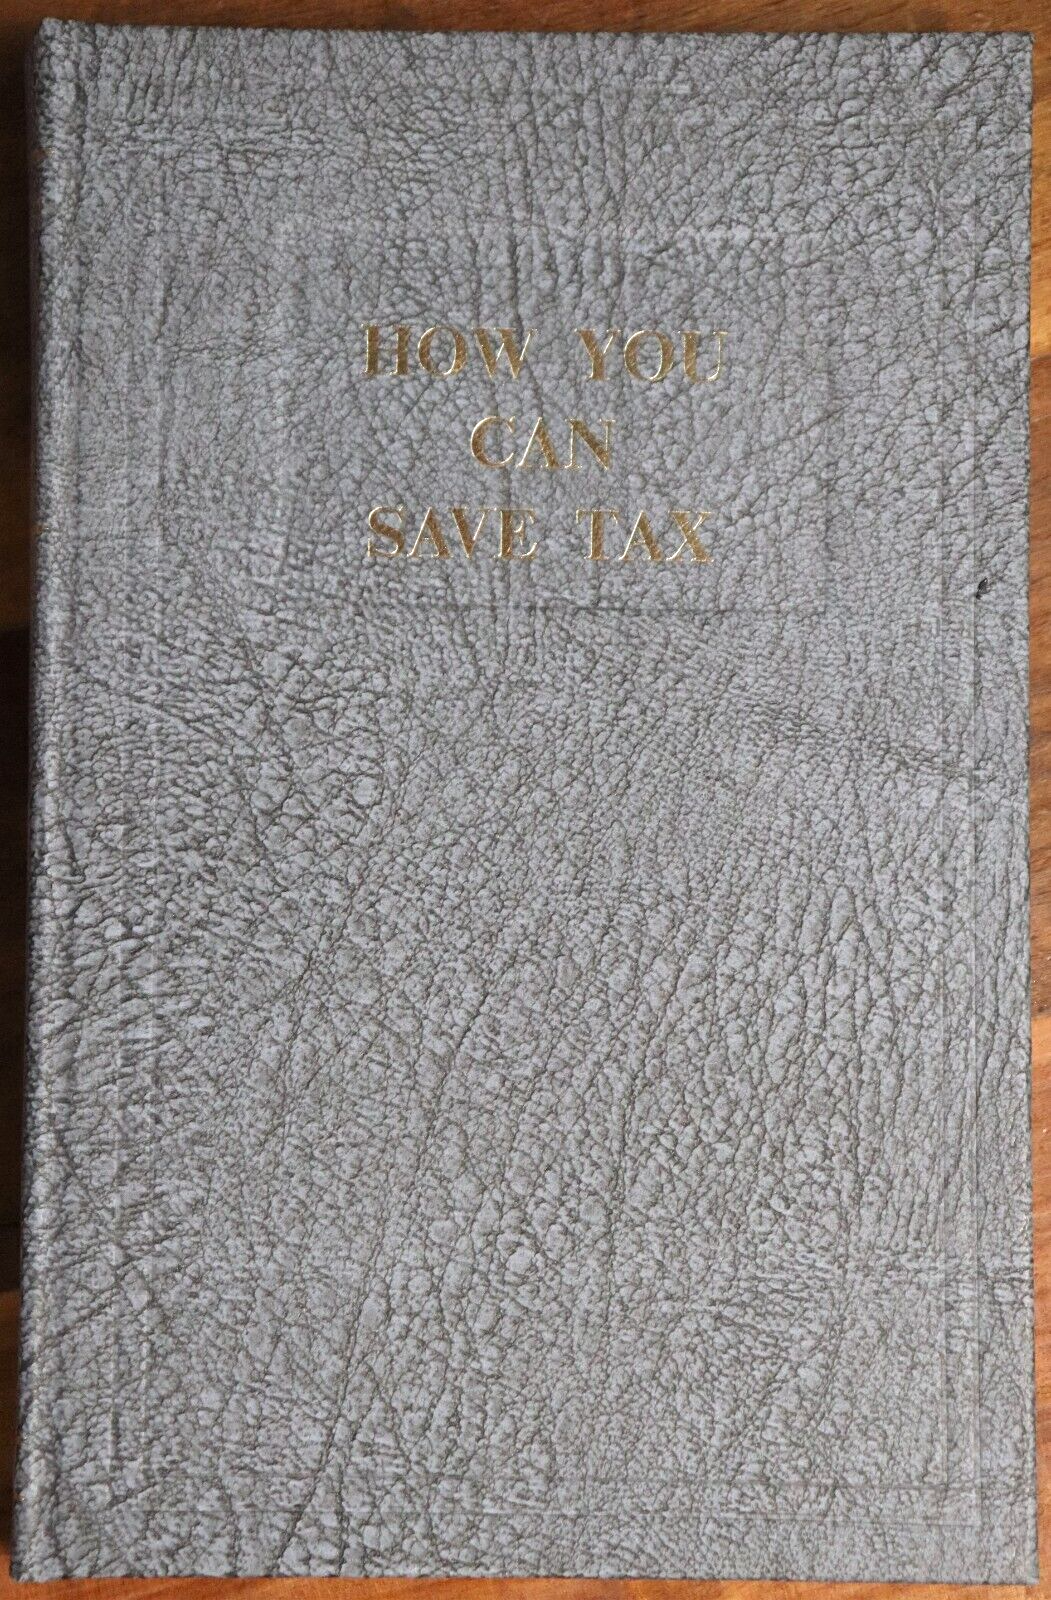 How You Can Save Tax by Jon Clinton - 1972 - Vintage Finance History Book